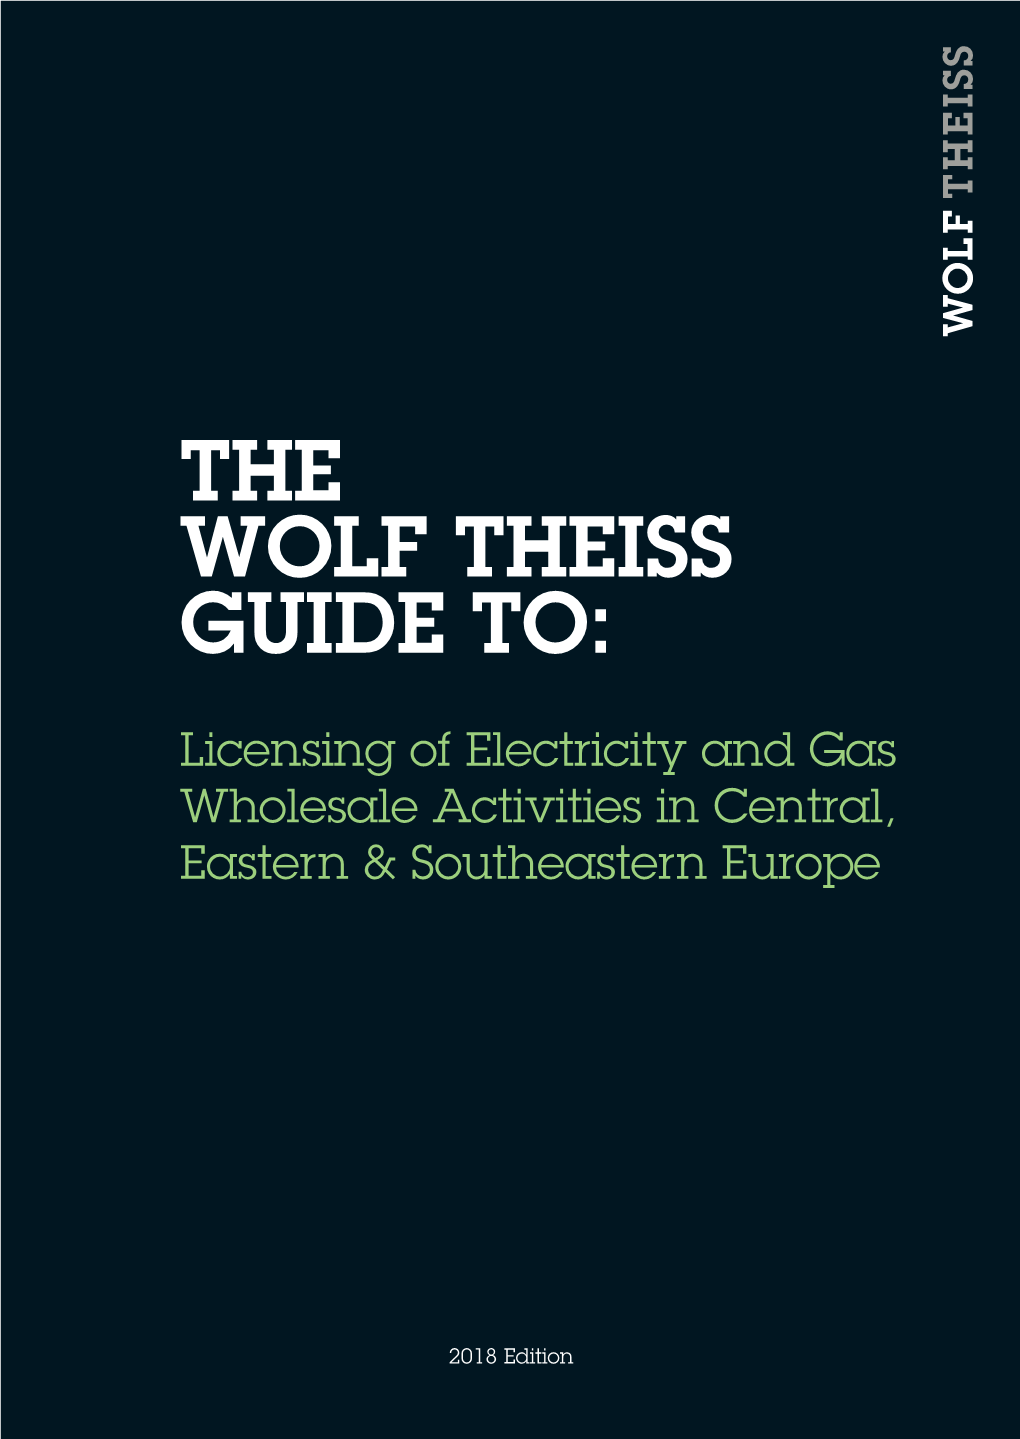 The Wolf Theiss Guide To